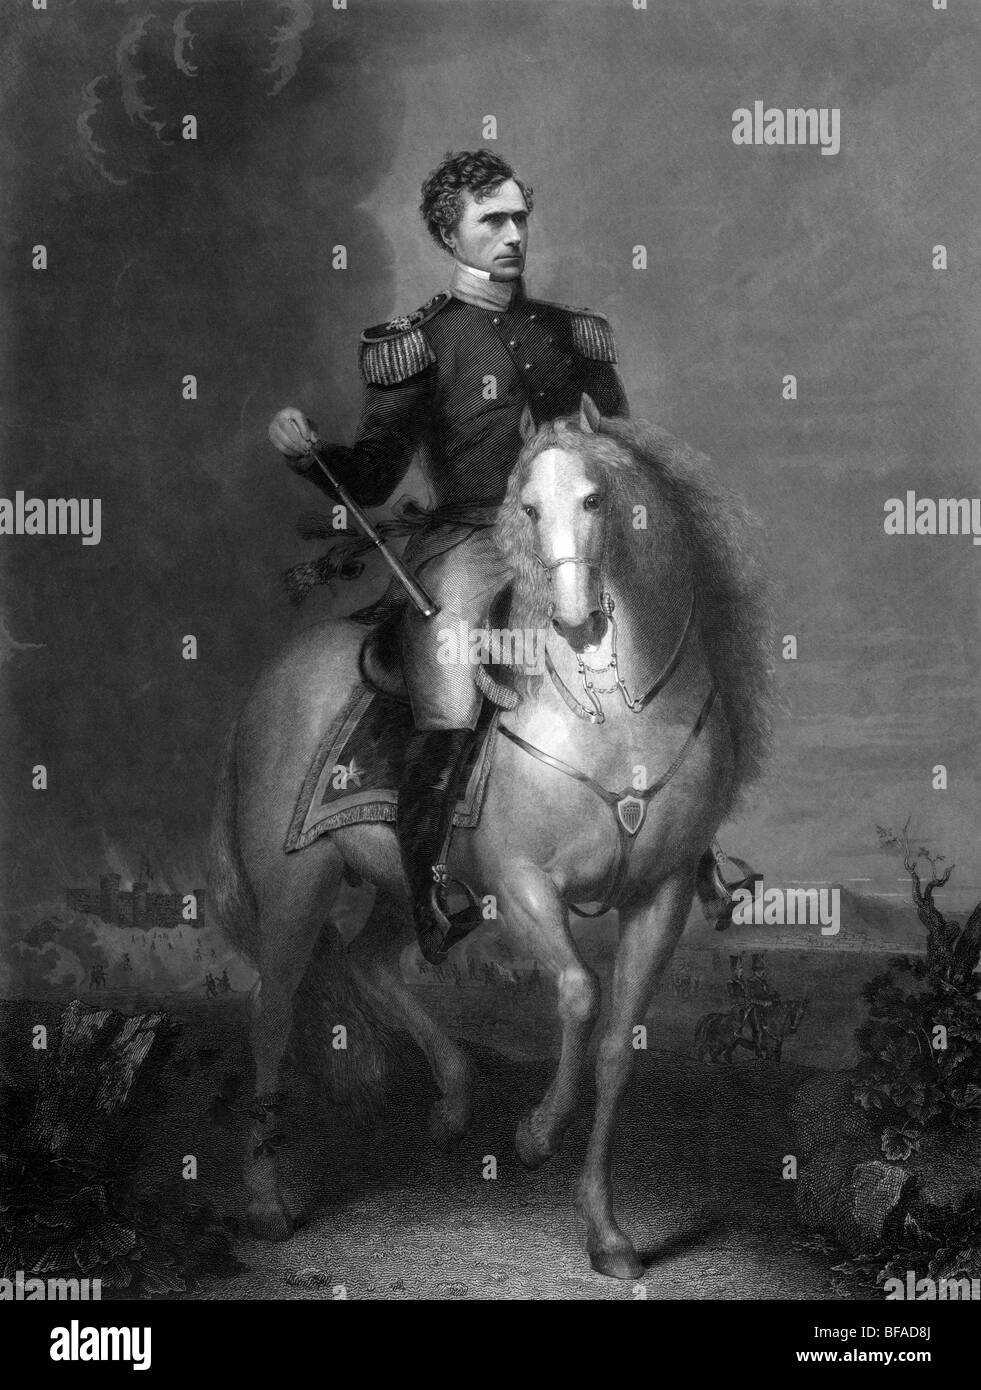 Portrait circa 1852 of Franklin Pierce as a General on horseback - Pierce (1804 - 1869) was the 14th US President (1853 - 1857). Stock Photo